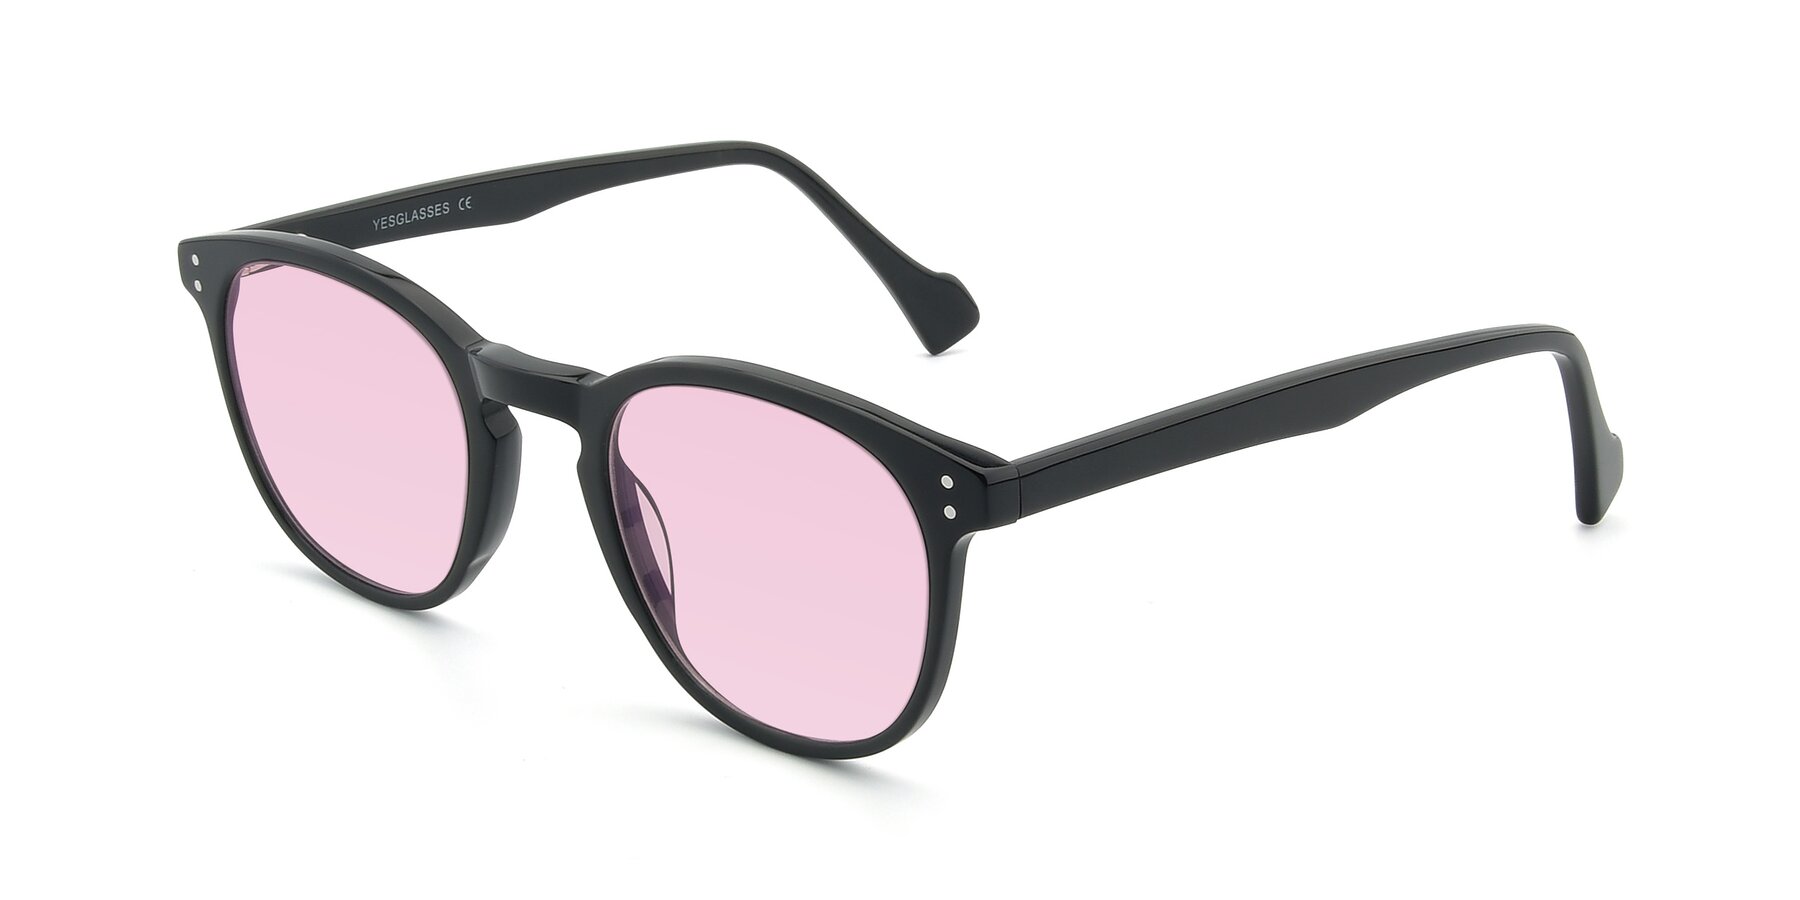 Angle of 17293 in Black with Light Pink Tinted Lenses